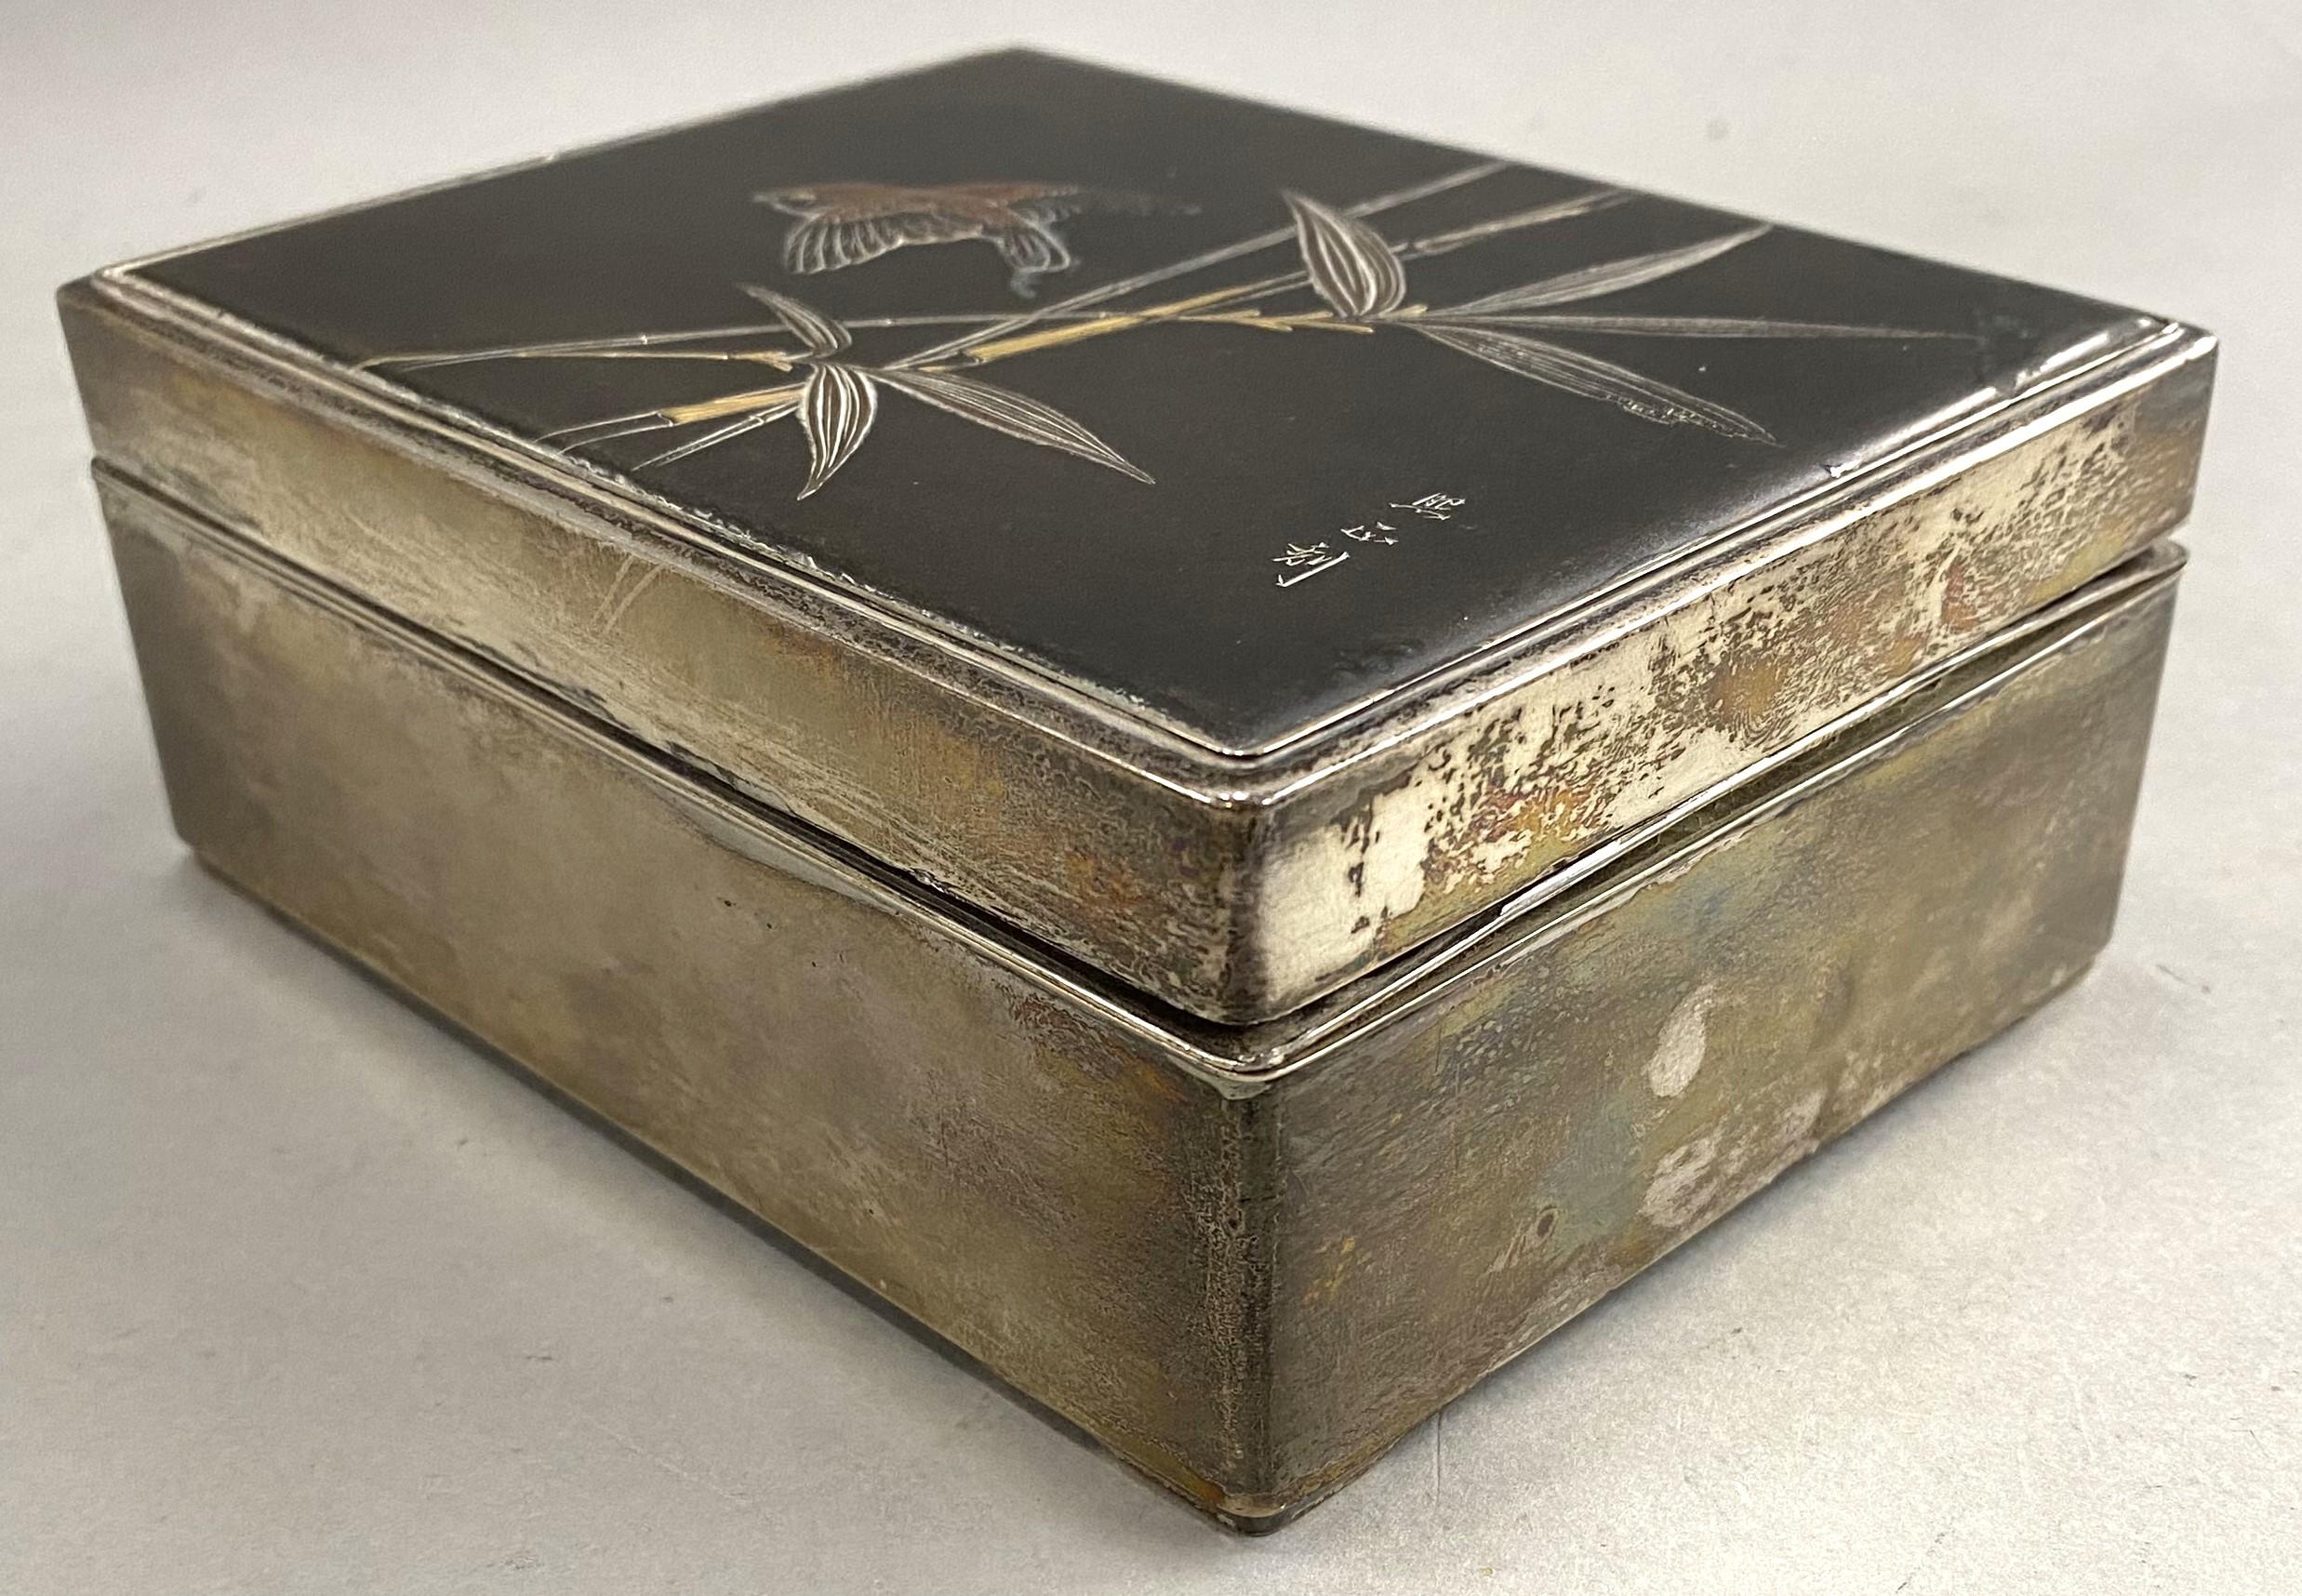 A fine Japanese Meiji silver and mixed metal cigarette box with bird and foliate decoration on the cover, signed on cover, and ebonized wooden interior, dating to the late 19th/early 20th century in very good overall condition, with slight tarnish